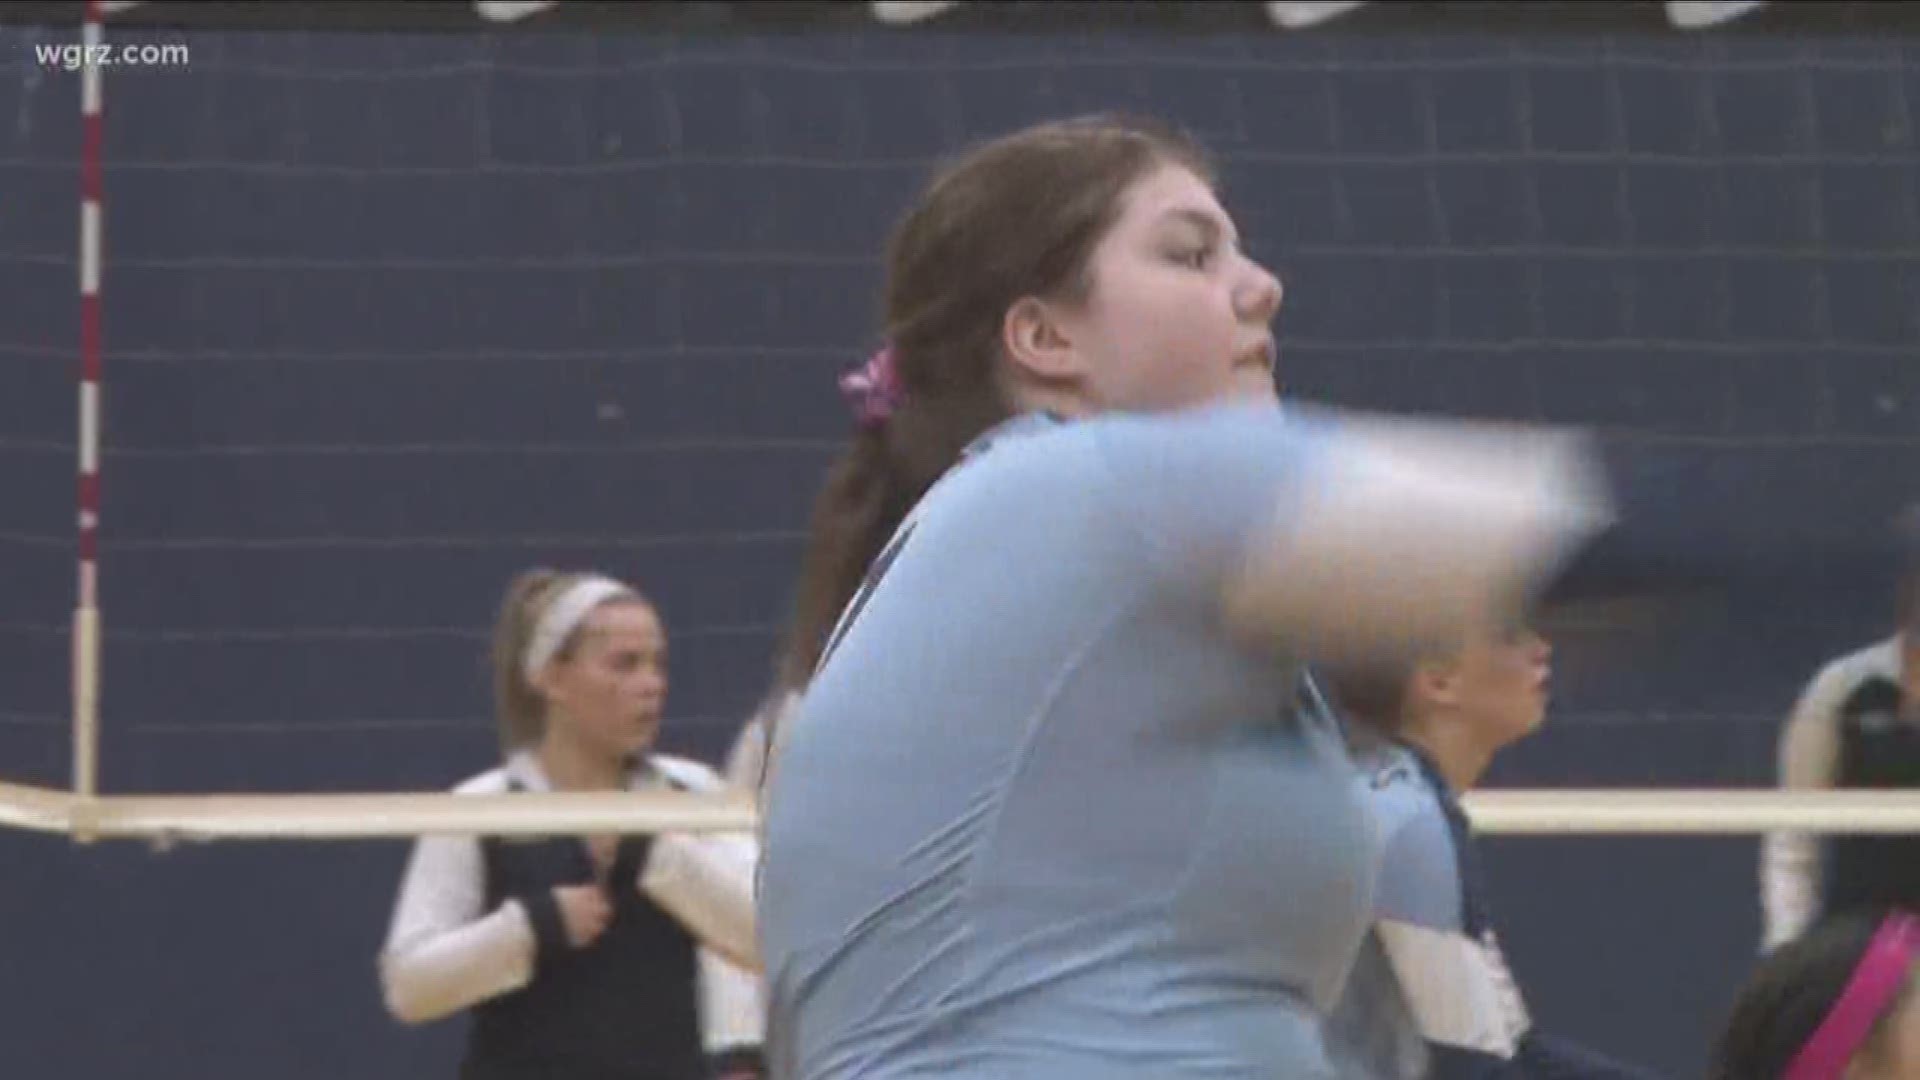 This week's Great Kid is a high school senior who's about to battle it out on the volleyball court, but that might be easy compared to a recent battle she just fought and won against cancer.